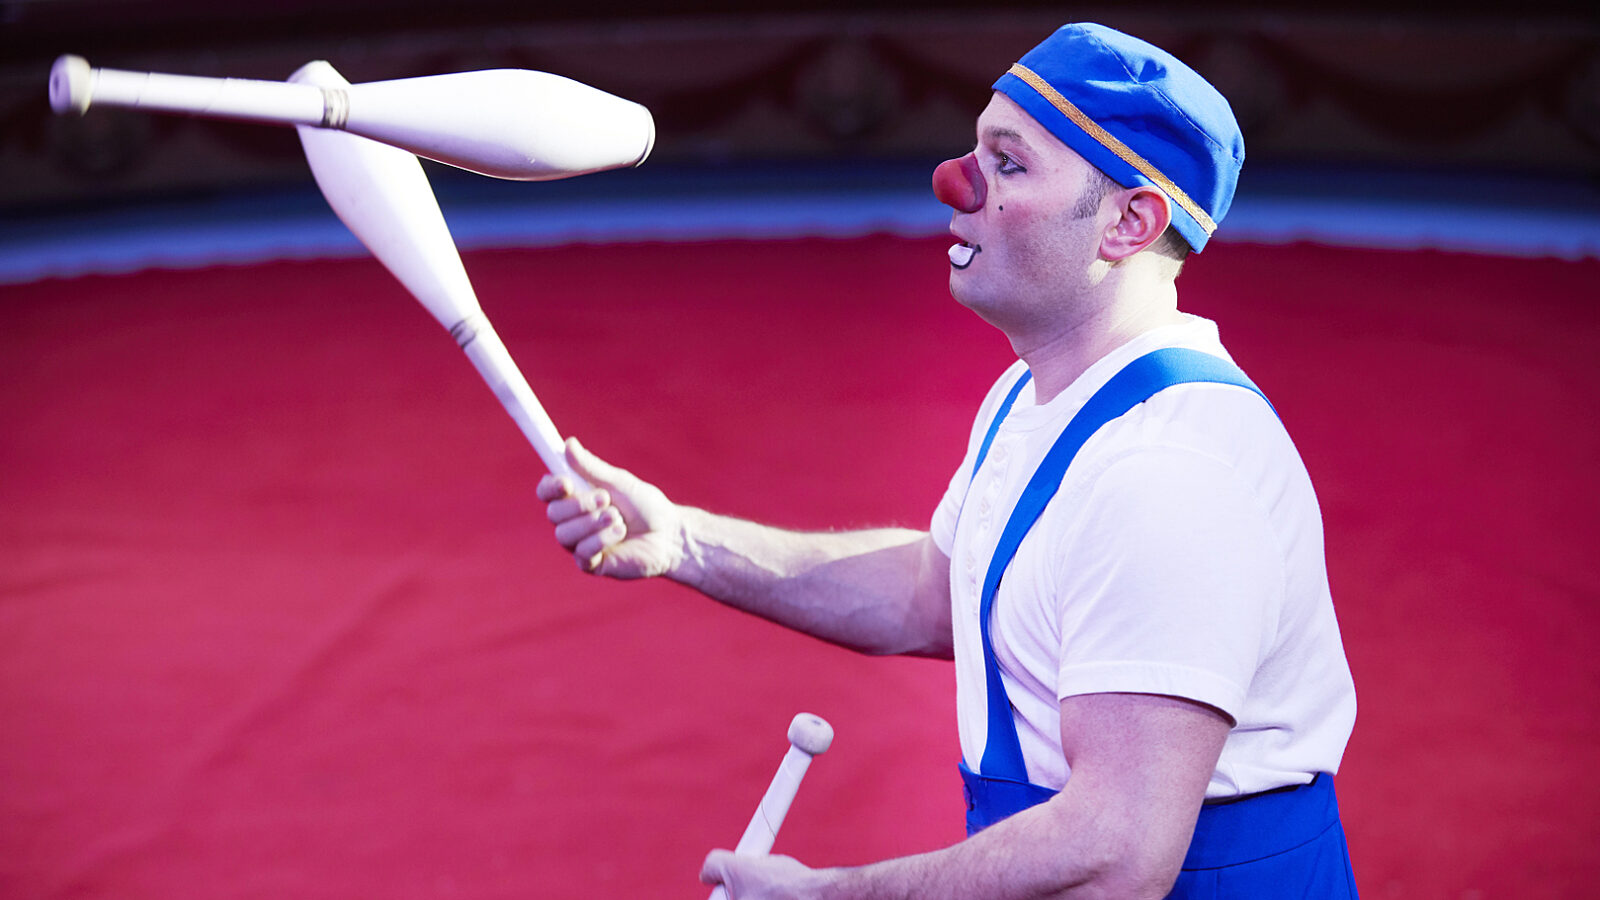 A photograph of Mooky juggling